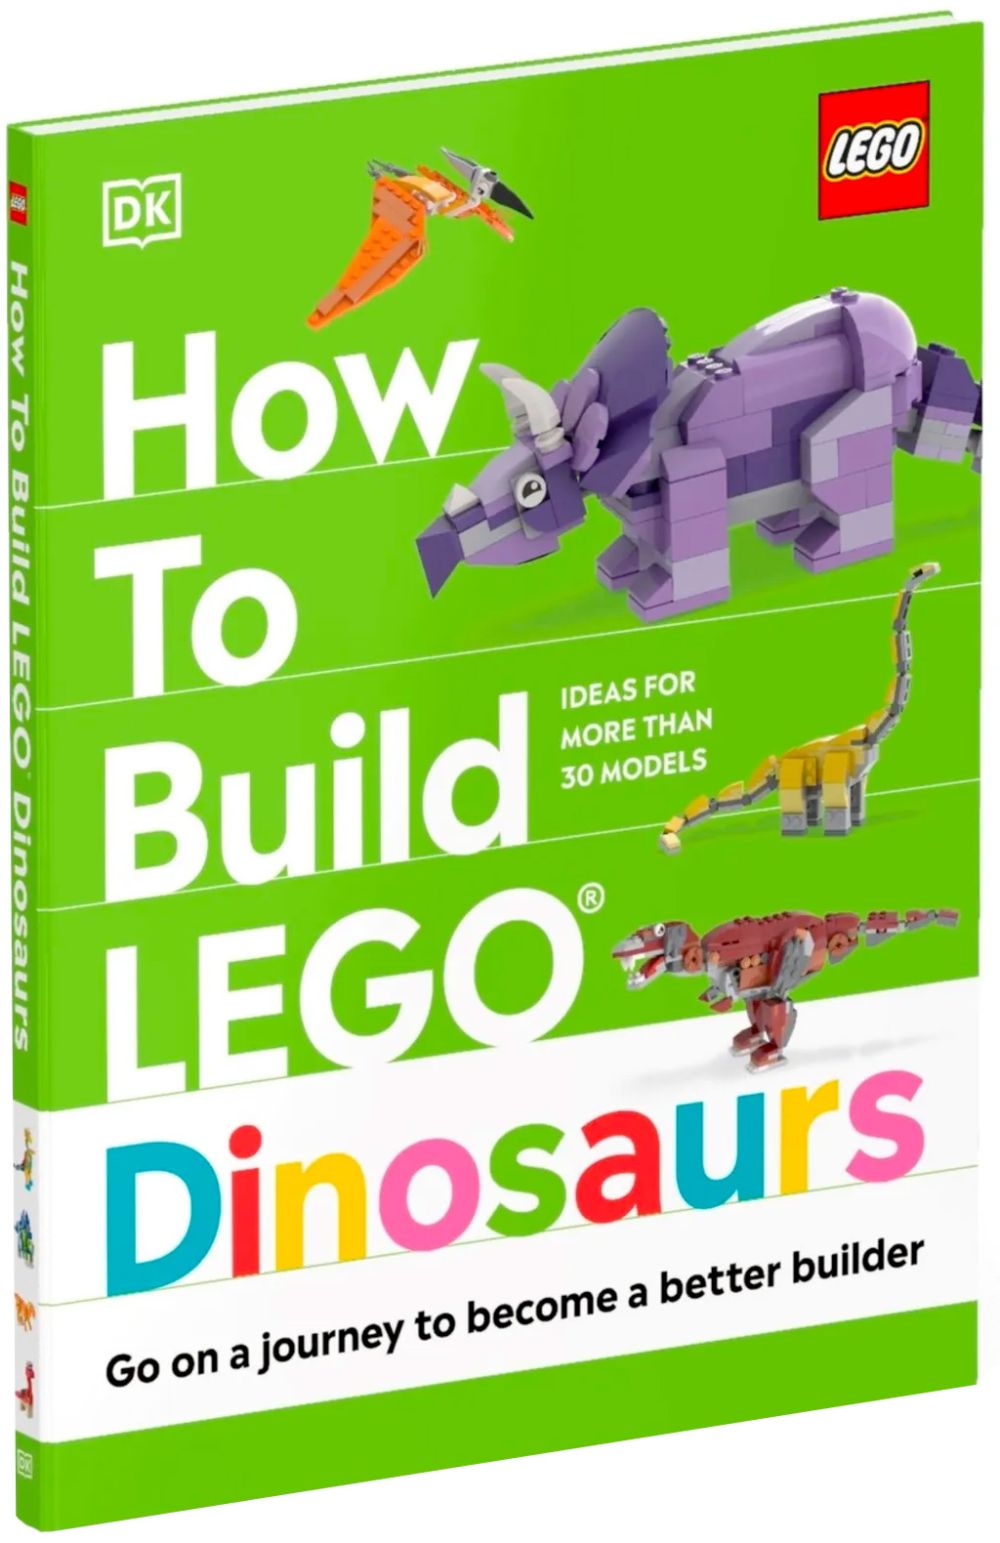 https://www.avenuedelabrique.com/img/produits/5007582/thumbs/5007582-how-to-build-lego-dinosaurs-4-1665747306_1000x0.jpg